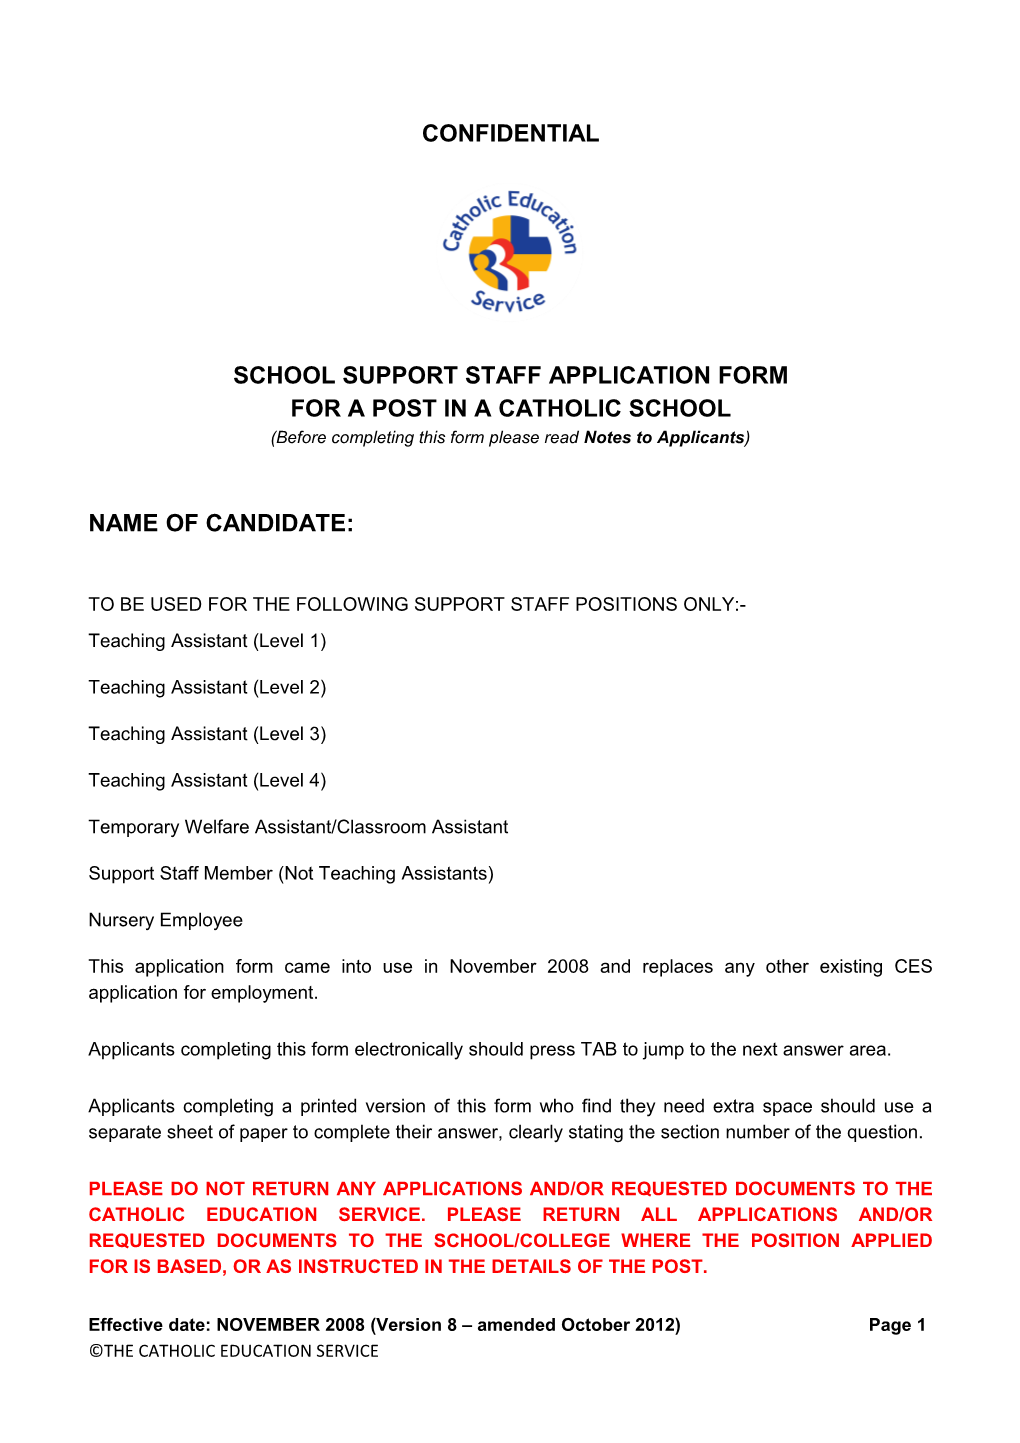 School Support Staff Application Form for a Post in a Catholicschool